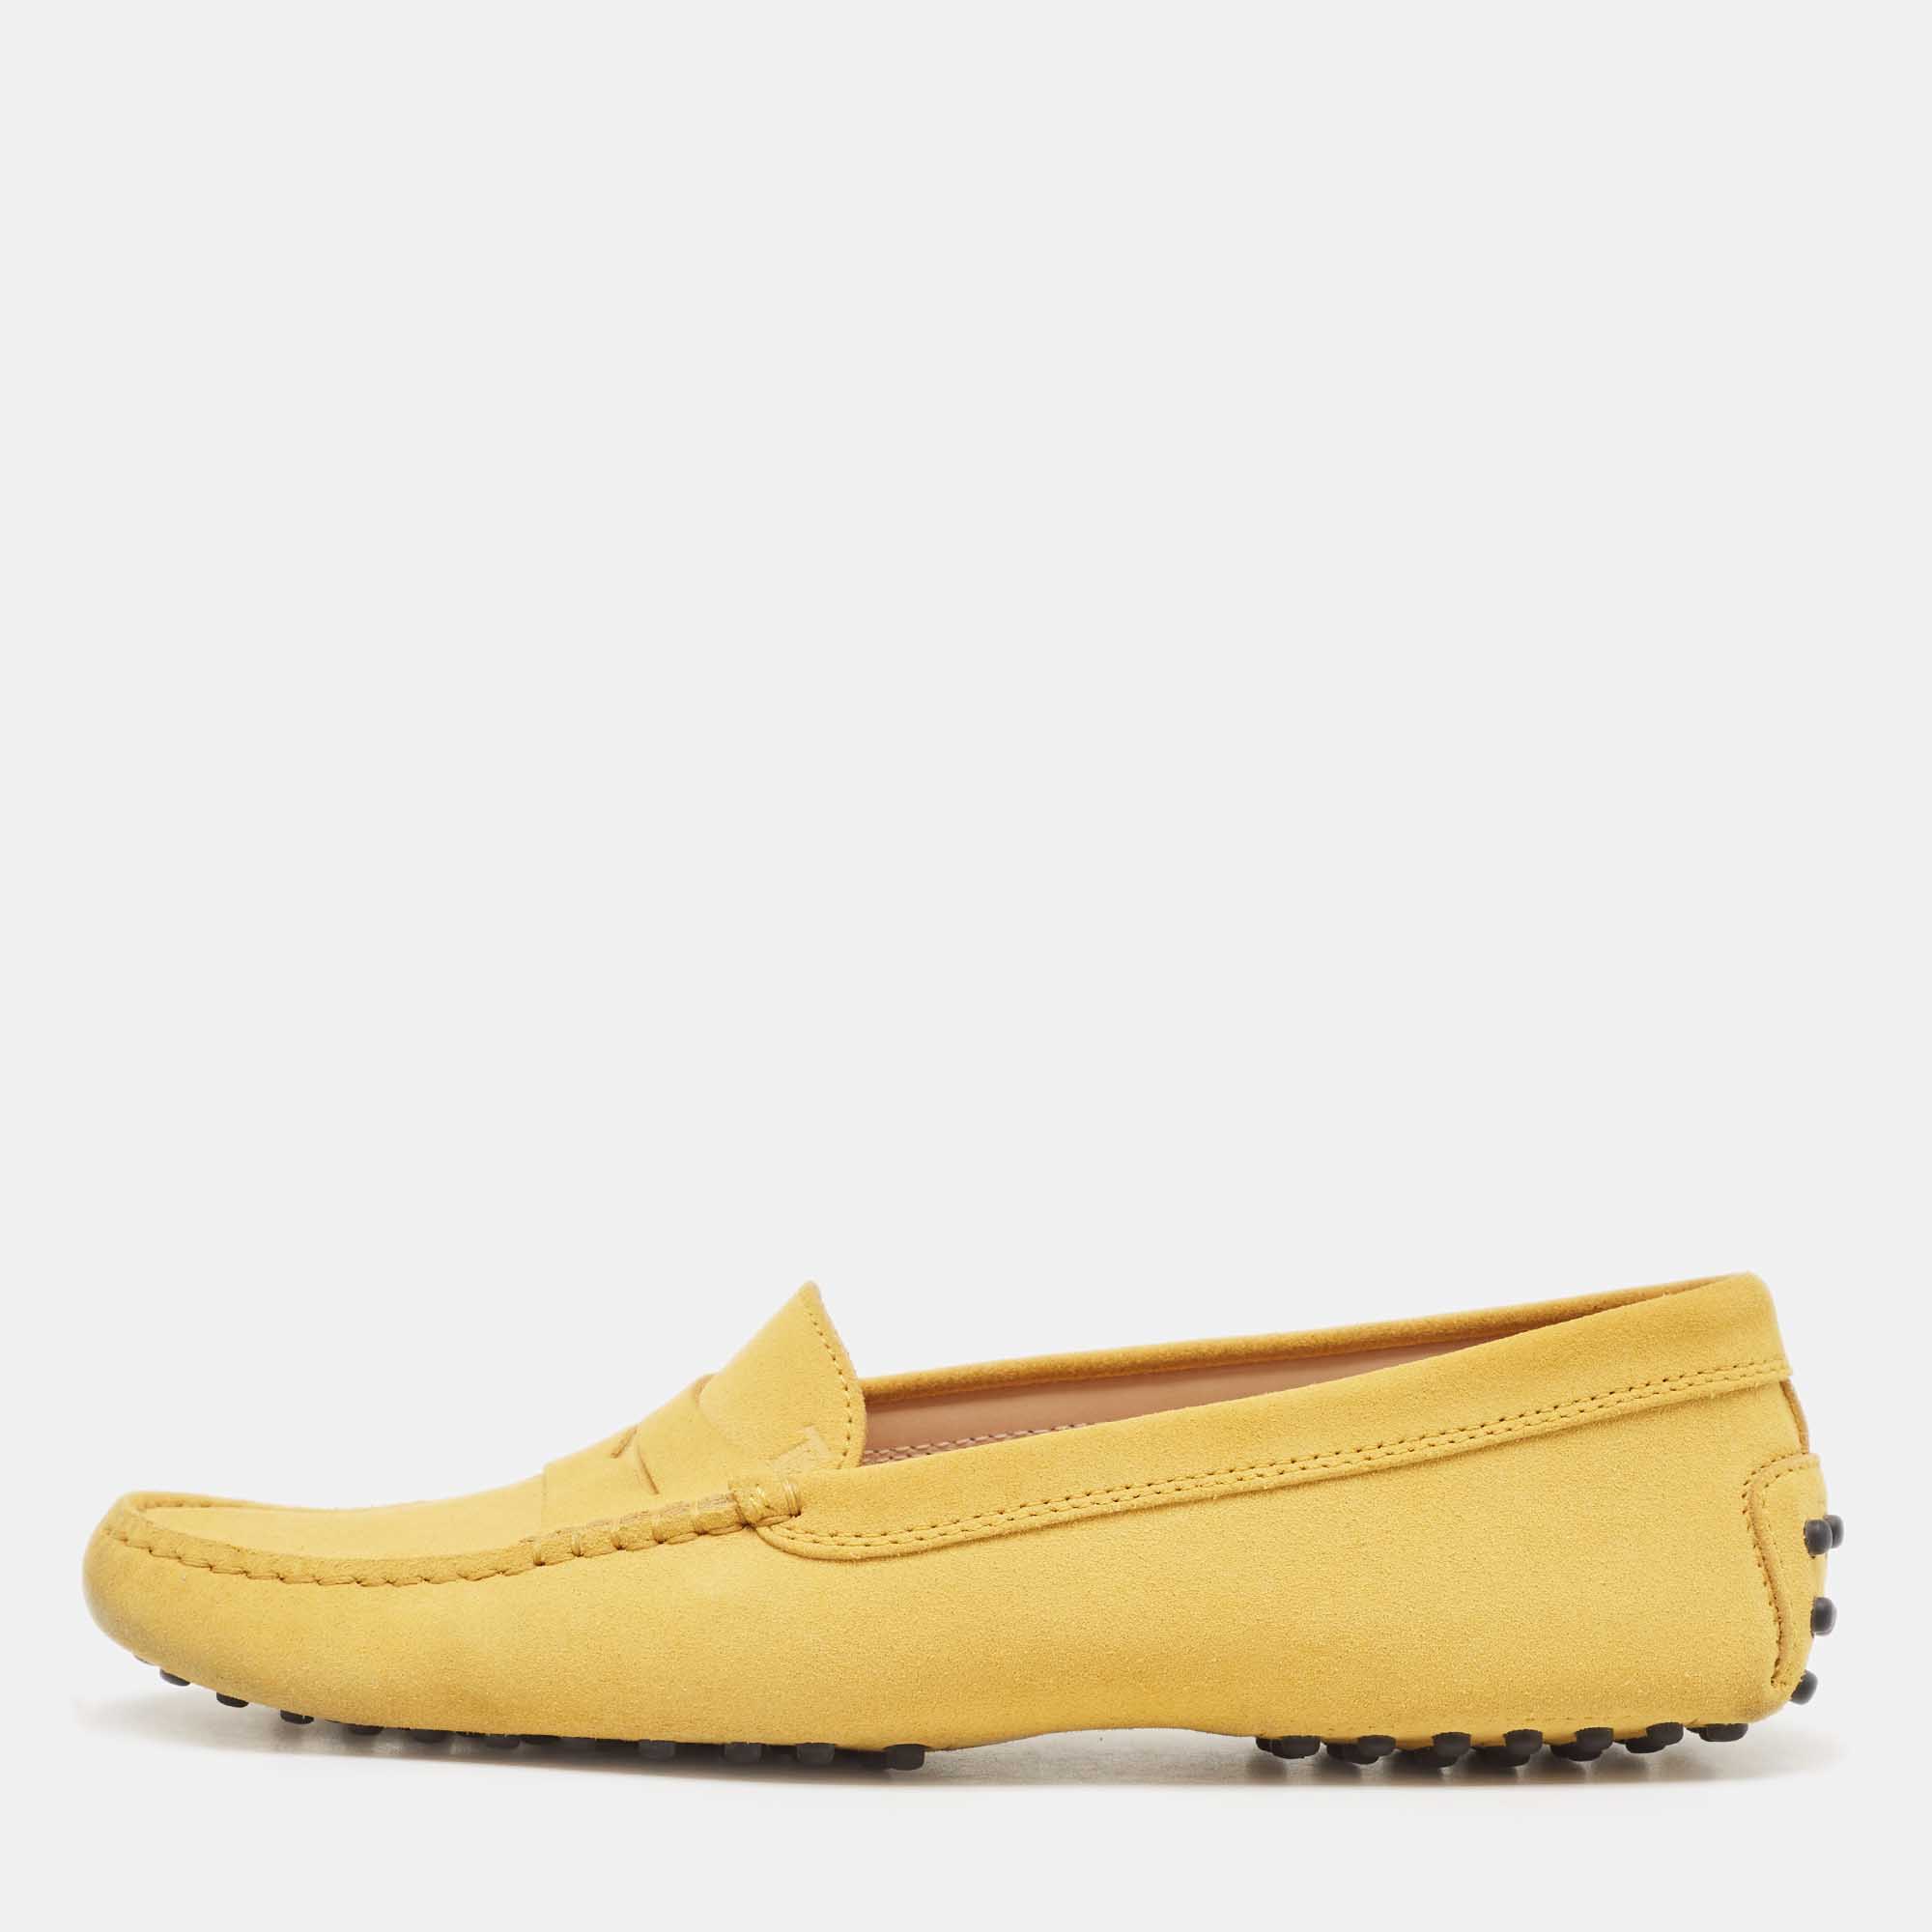 Tod's yellow suede driving loafers size 39